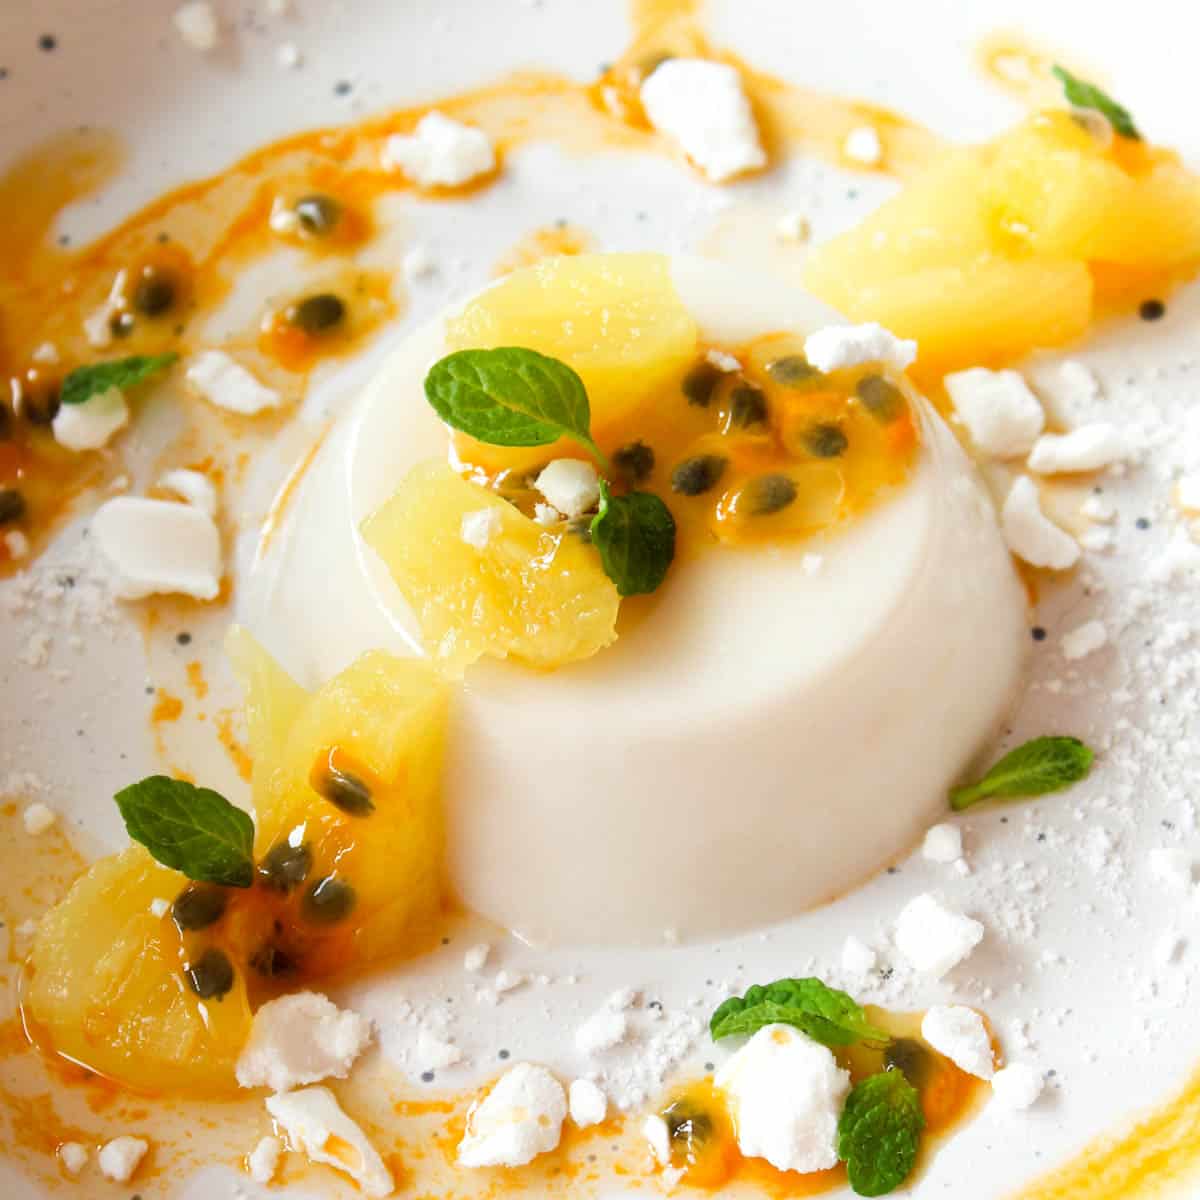 coconut panna cotta served with pineapple, passion fruit and merengue crumbs